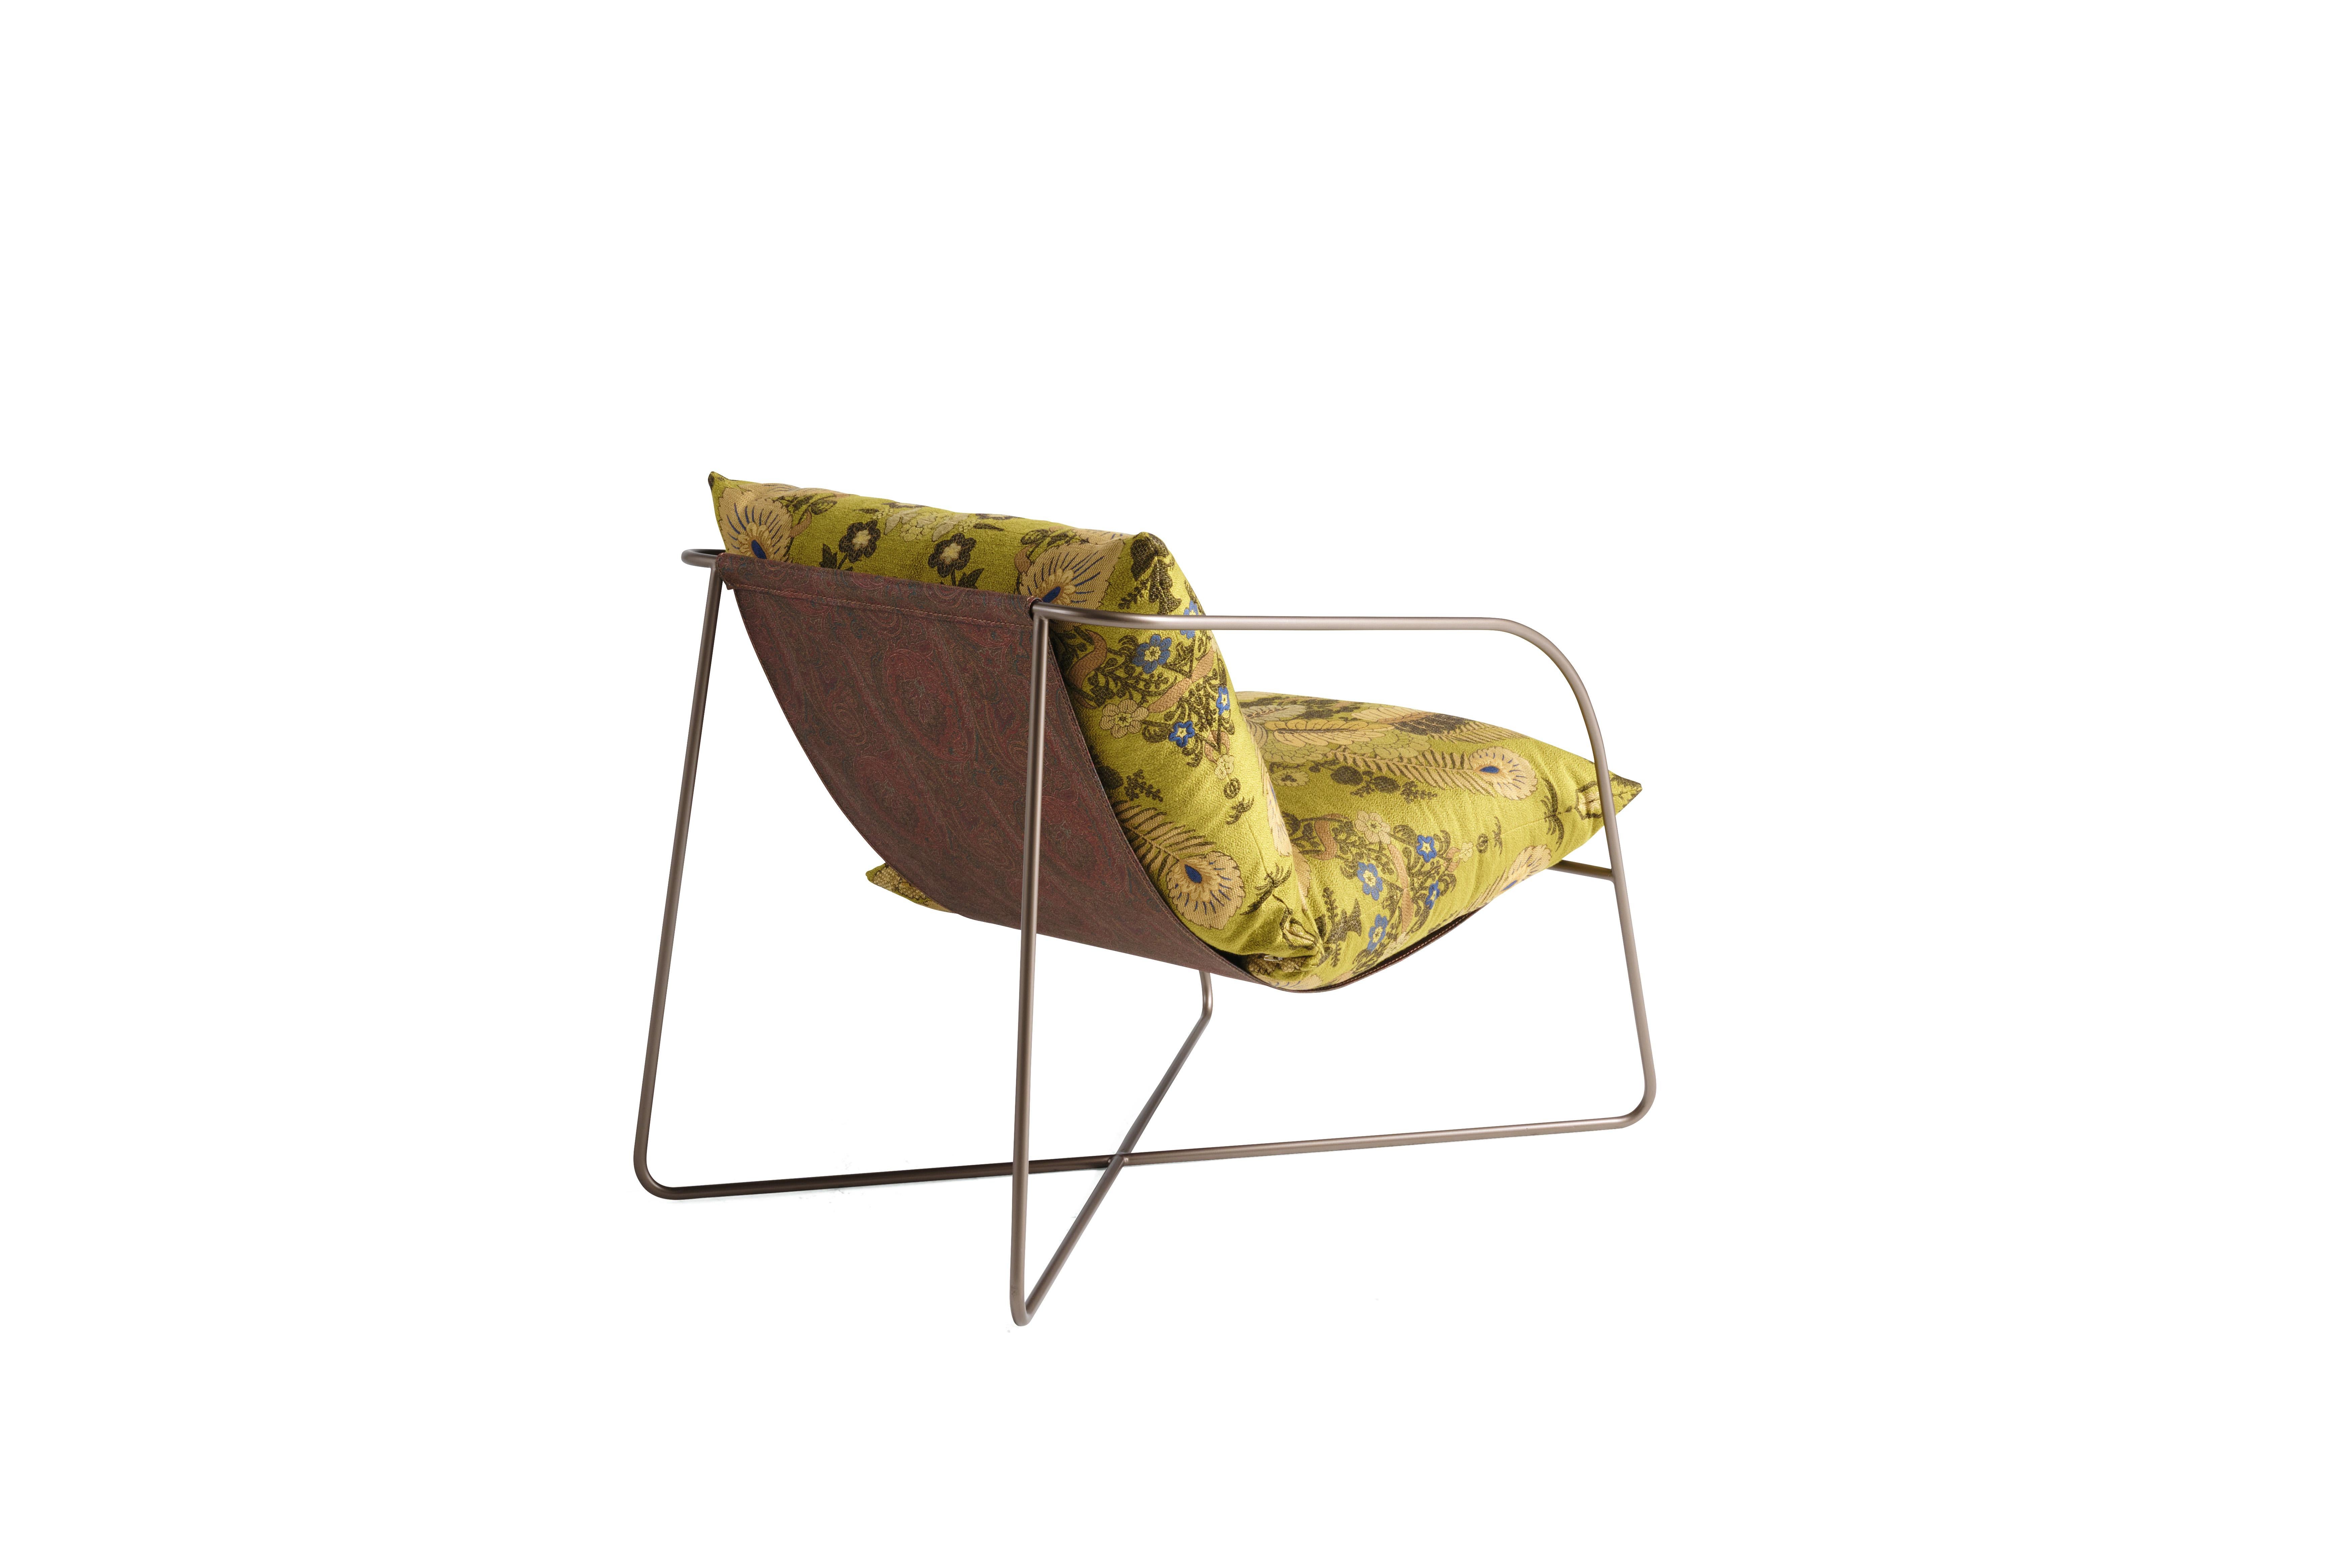 Italian 21st Century Levity Armchair in Green Jacquard Fabric by Etro Home Interiors For Sale